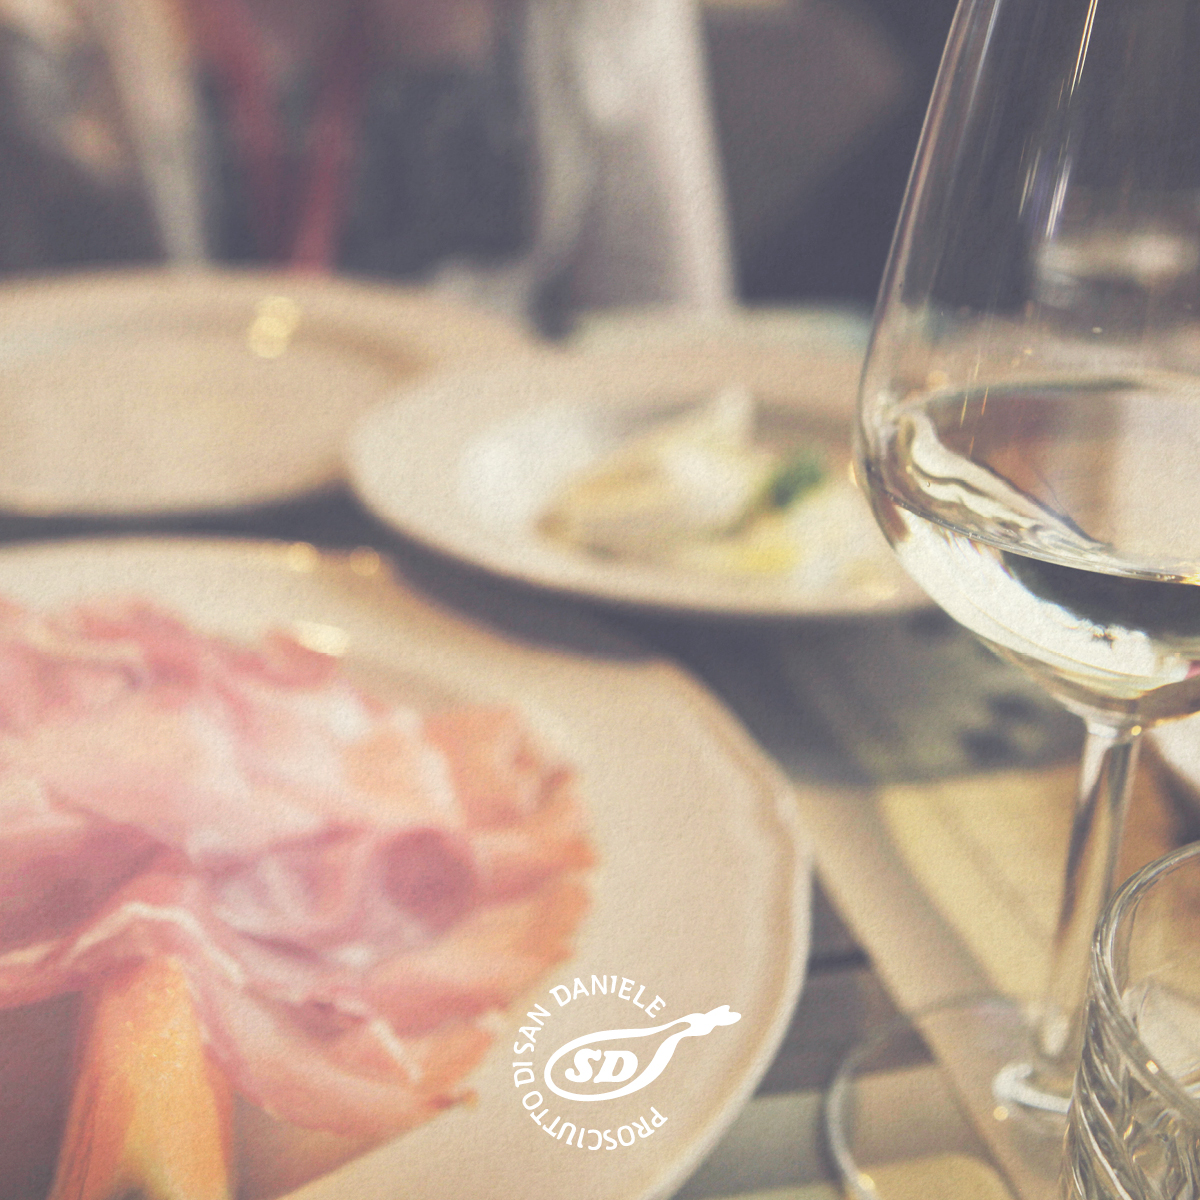 What’s the best drink to enjoy with Prosciutto di San Daniele?